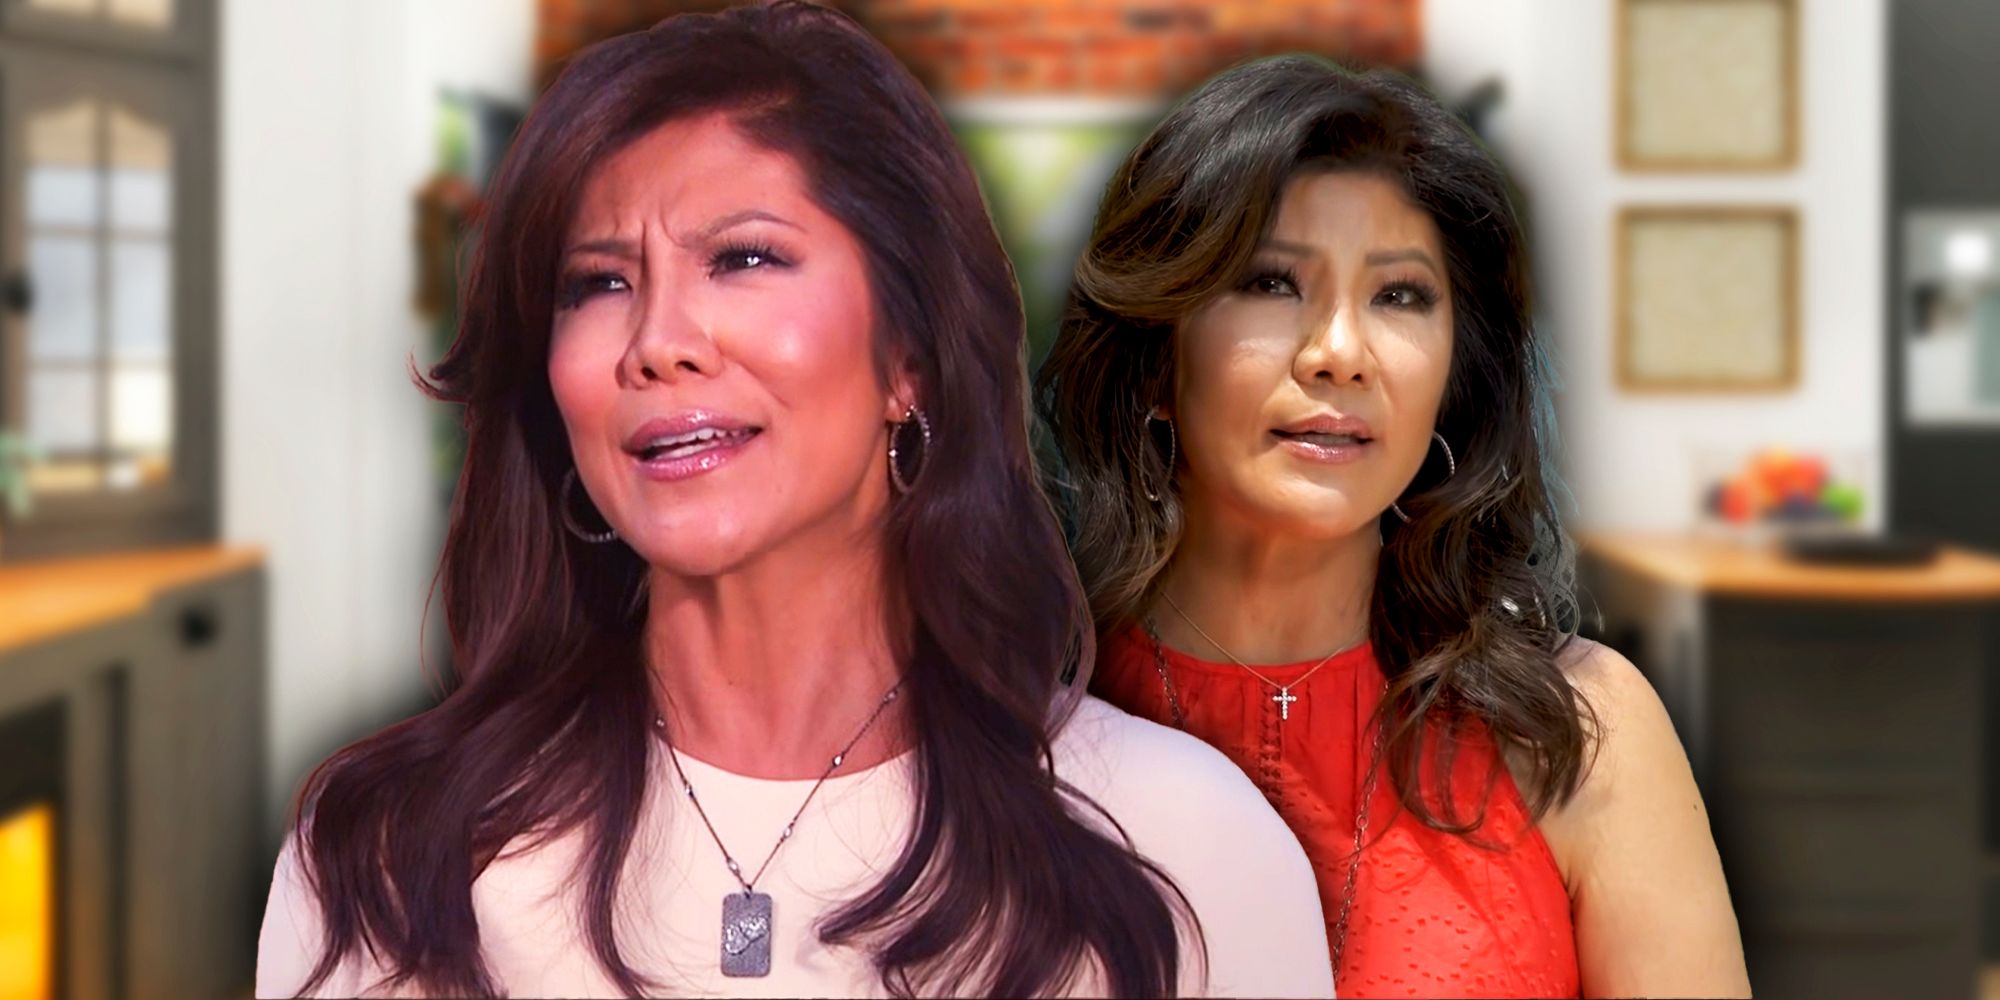 julie chen big brother montage two images of Julie Chen Moonves with different moods